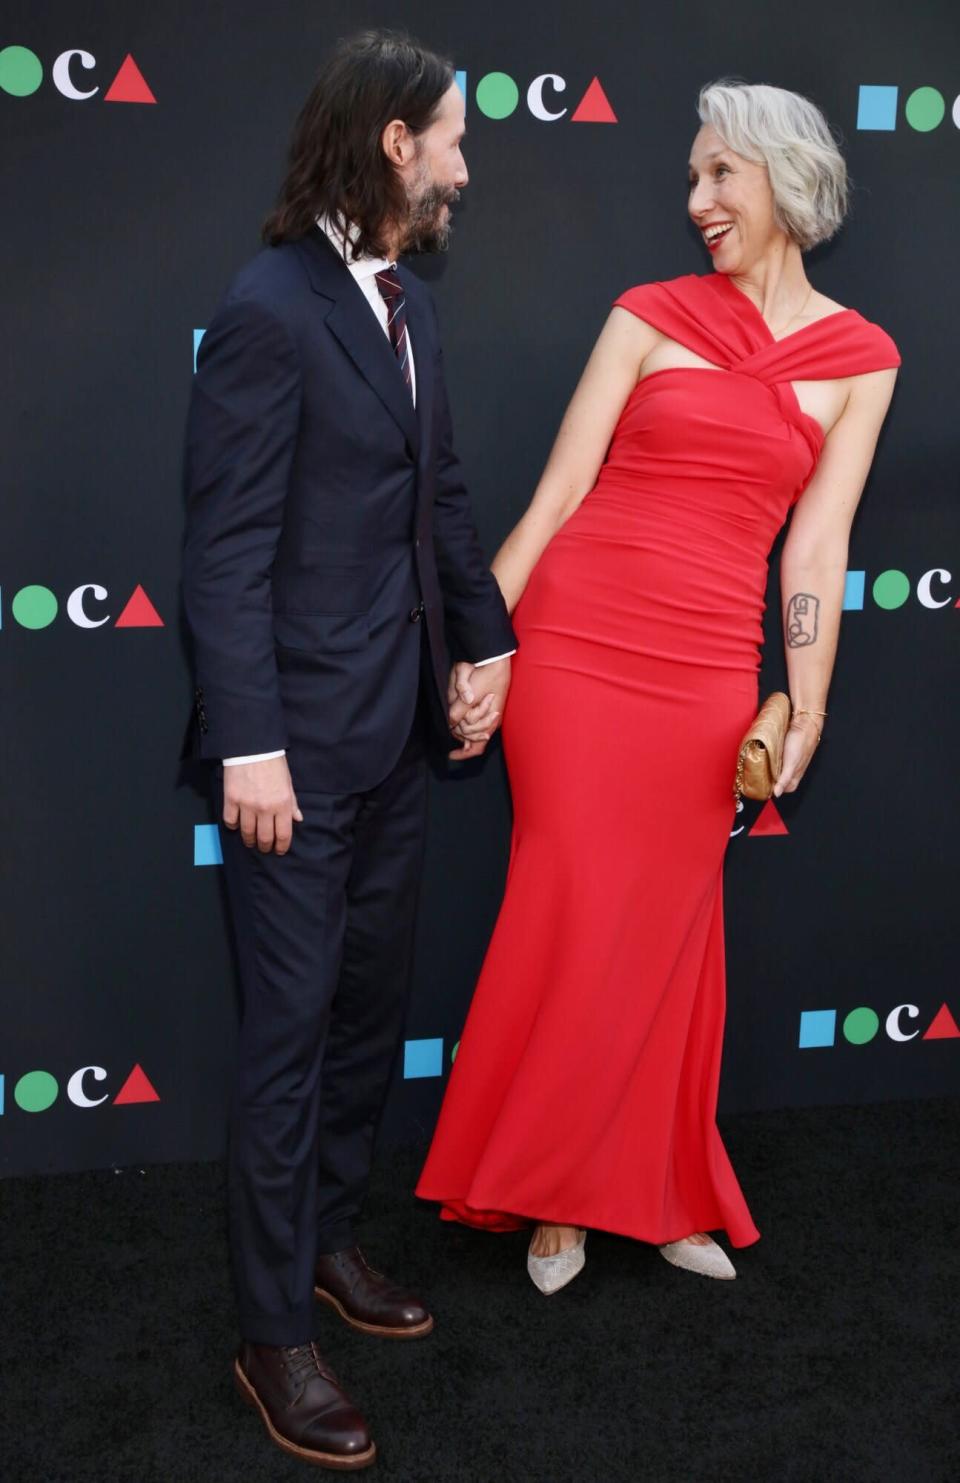 LOS ANGELES, CALIFORNIA - JUNE 04: Keanu Reeves and Alexandra Grant attend the 2022 MOCA Gala at The Geffen Contemporary at MOCA on June 04, 2022 in Los Angeles, California.  (Photo by Robin L. Marshall/Getty Images)